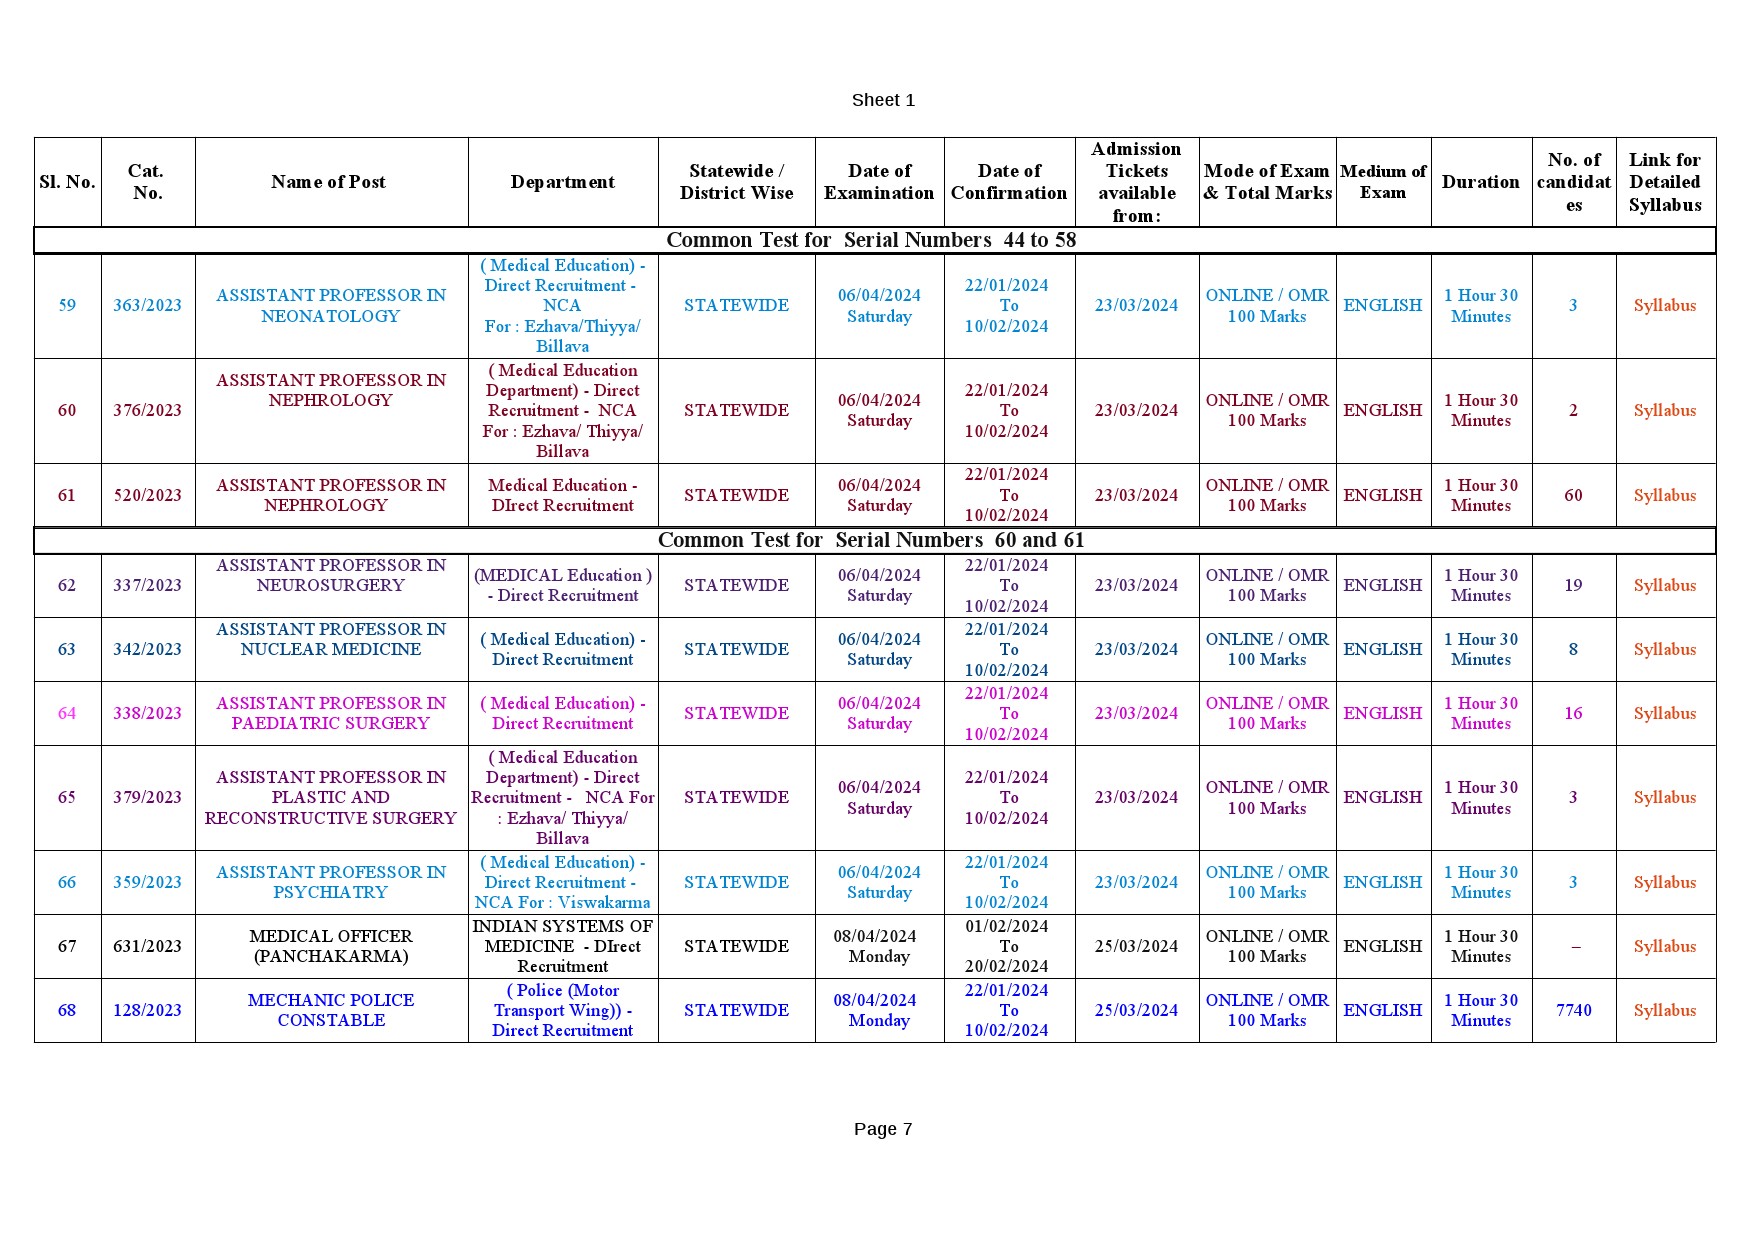 Examination Programme For The Month Of April 2024 - Notification Image 7